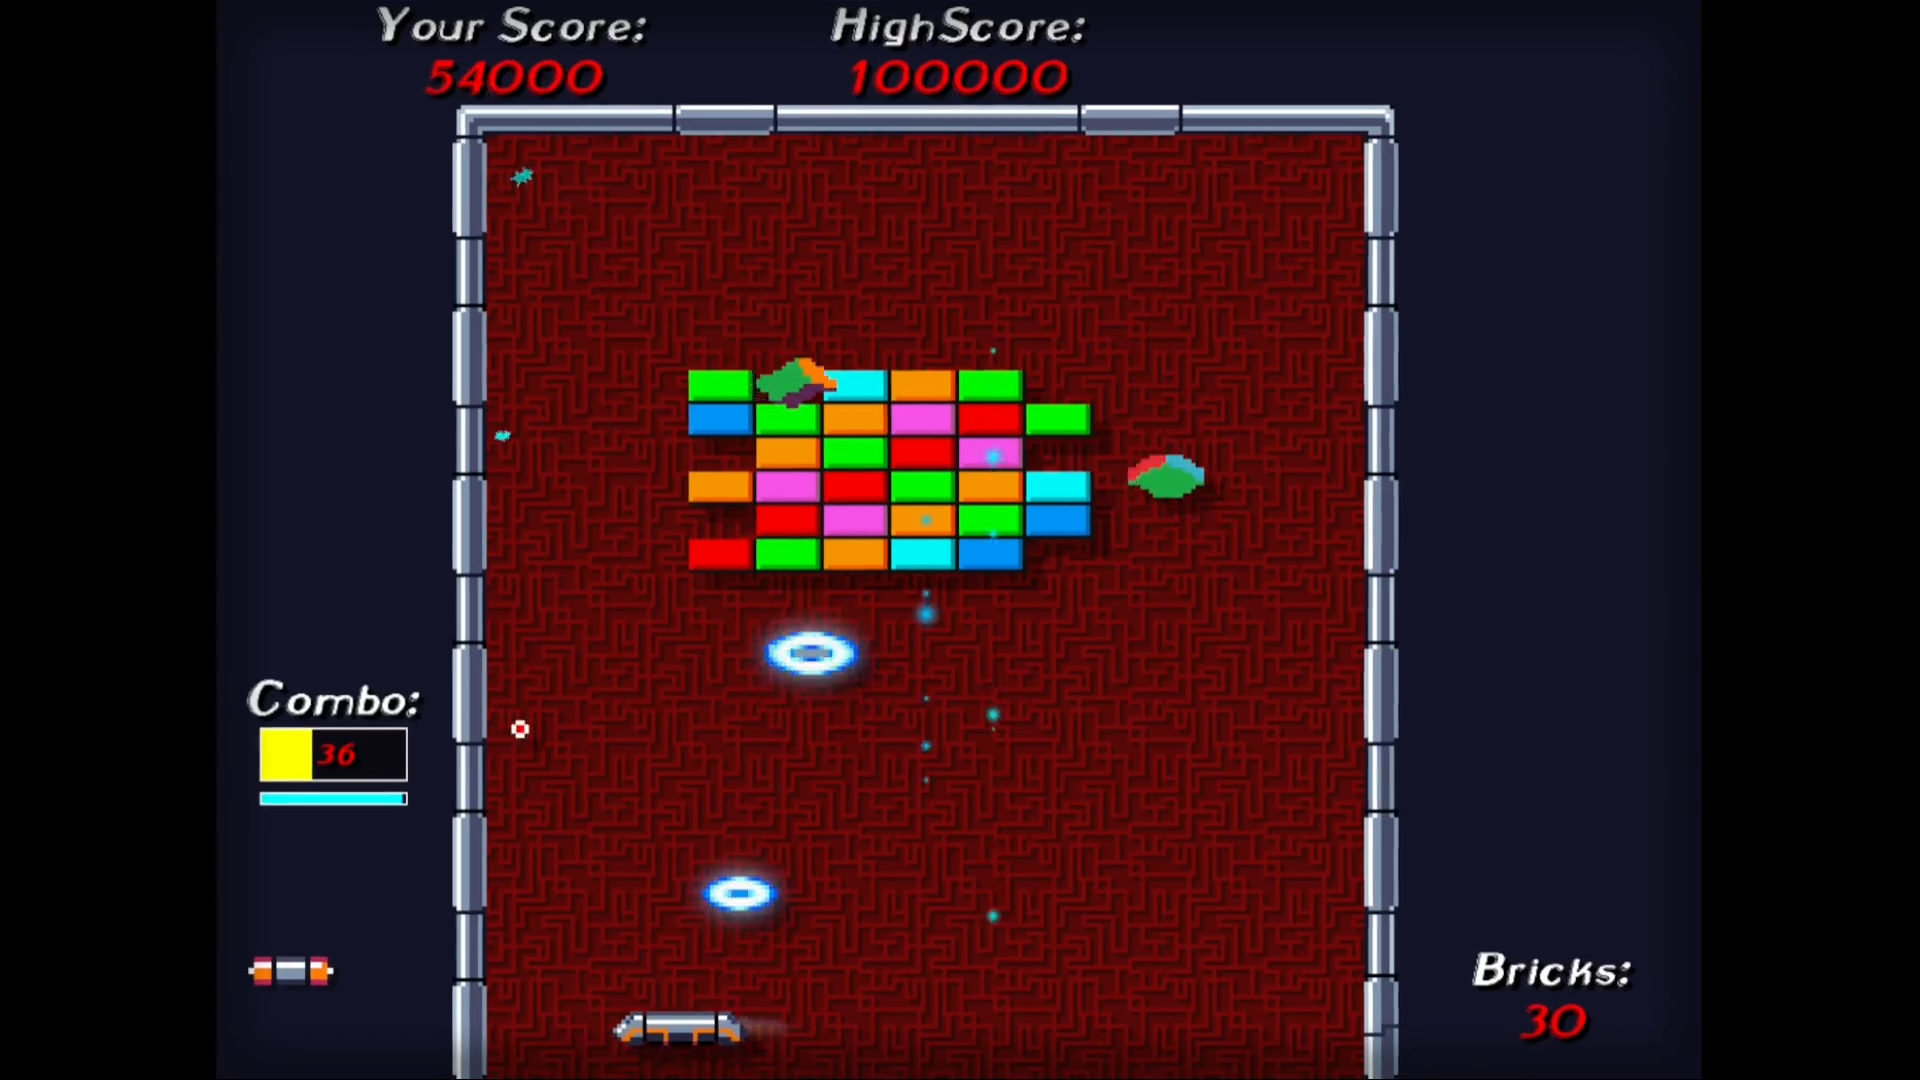 BREAKOID - Play Online for Free!